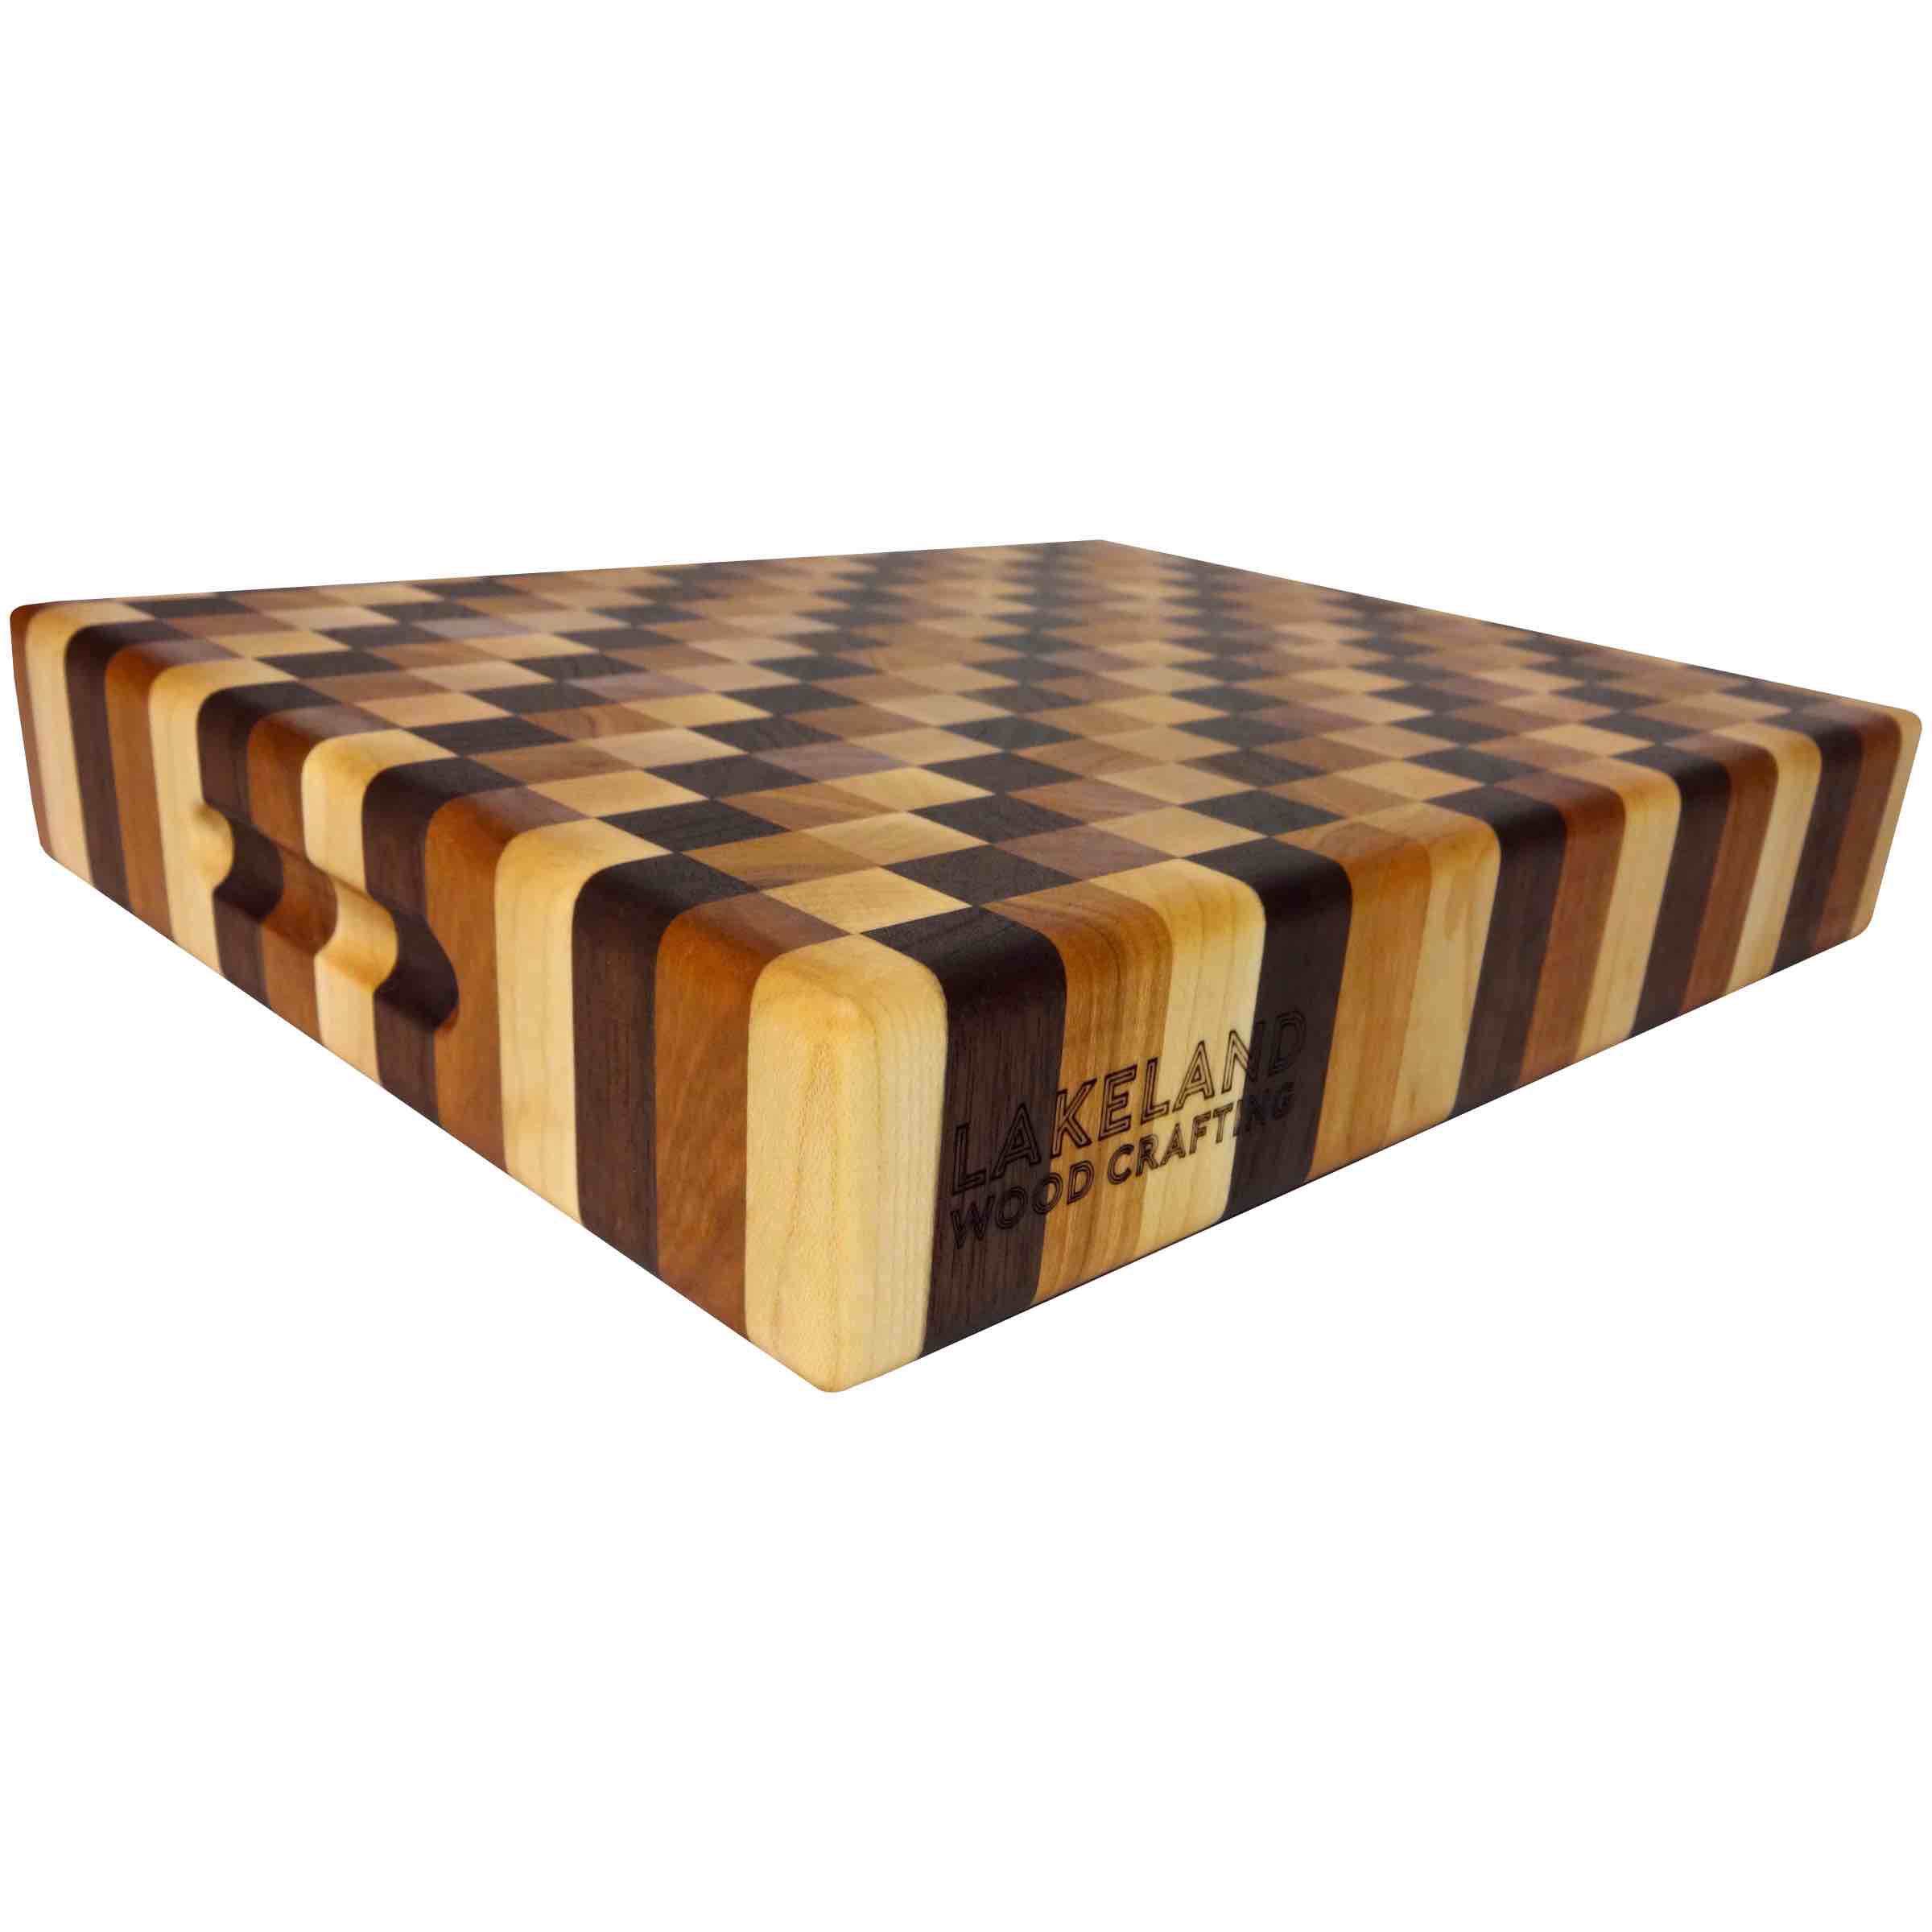 End Grain Cutting Board Cherry Maple Walnut Lakeland Wood Crafting,How Do You Become An Interior Designer